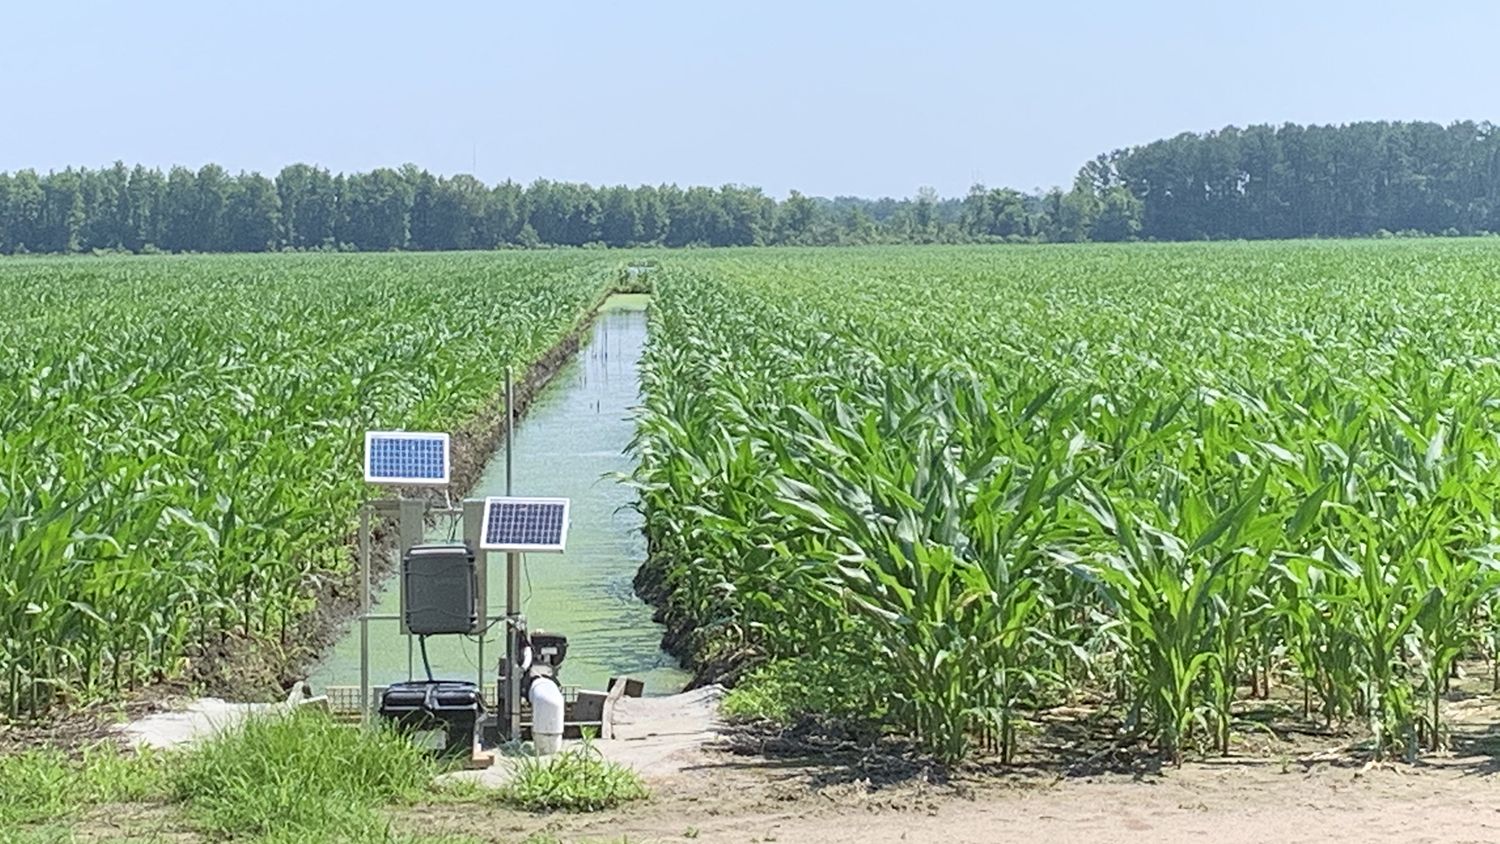 Solar panels and other equipment at the end of a drainage canal in a farm field